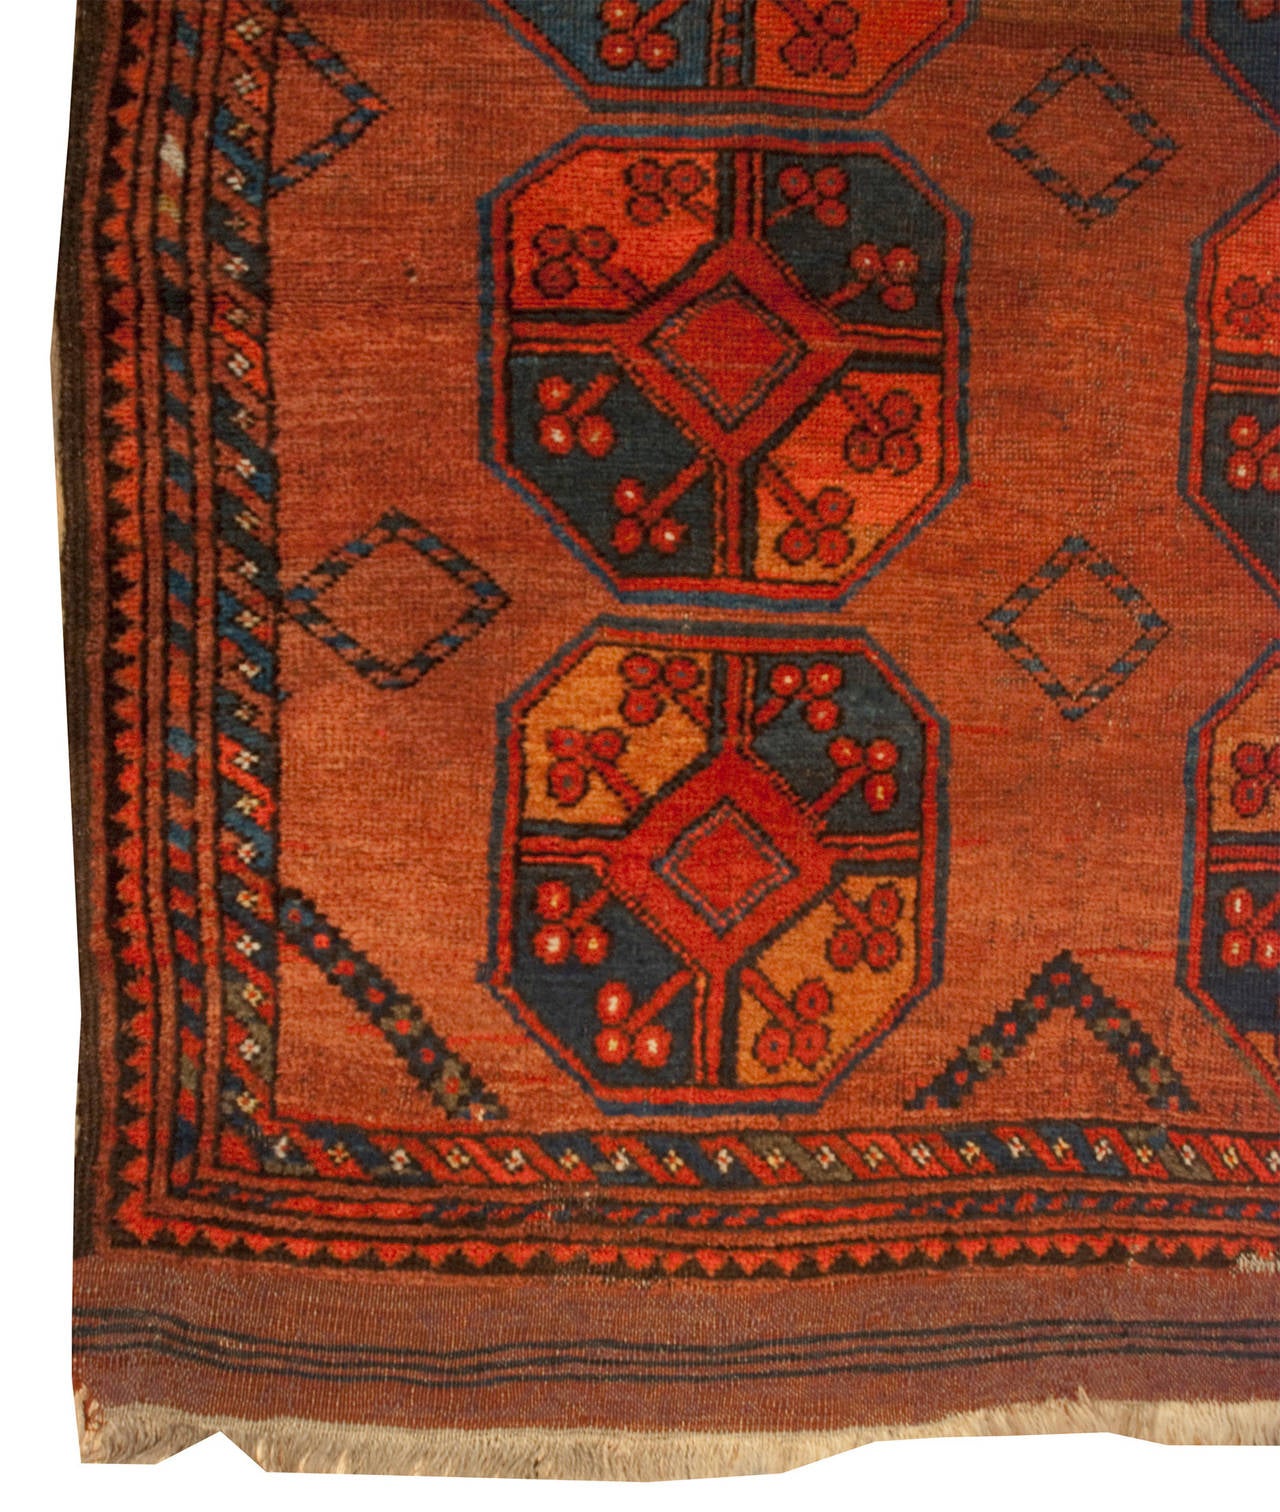 An early 20th century Afghani Keva rug with eight large octagonal floral medallions on a rusty-orange background, surrounded by multiple complementary geometric borders.